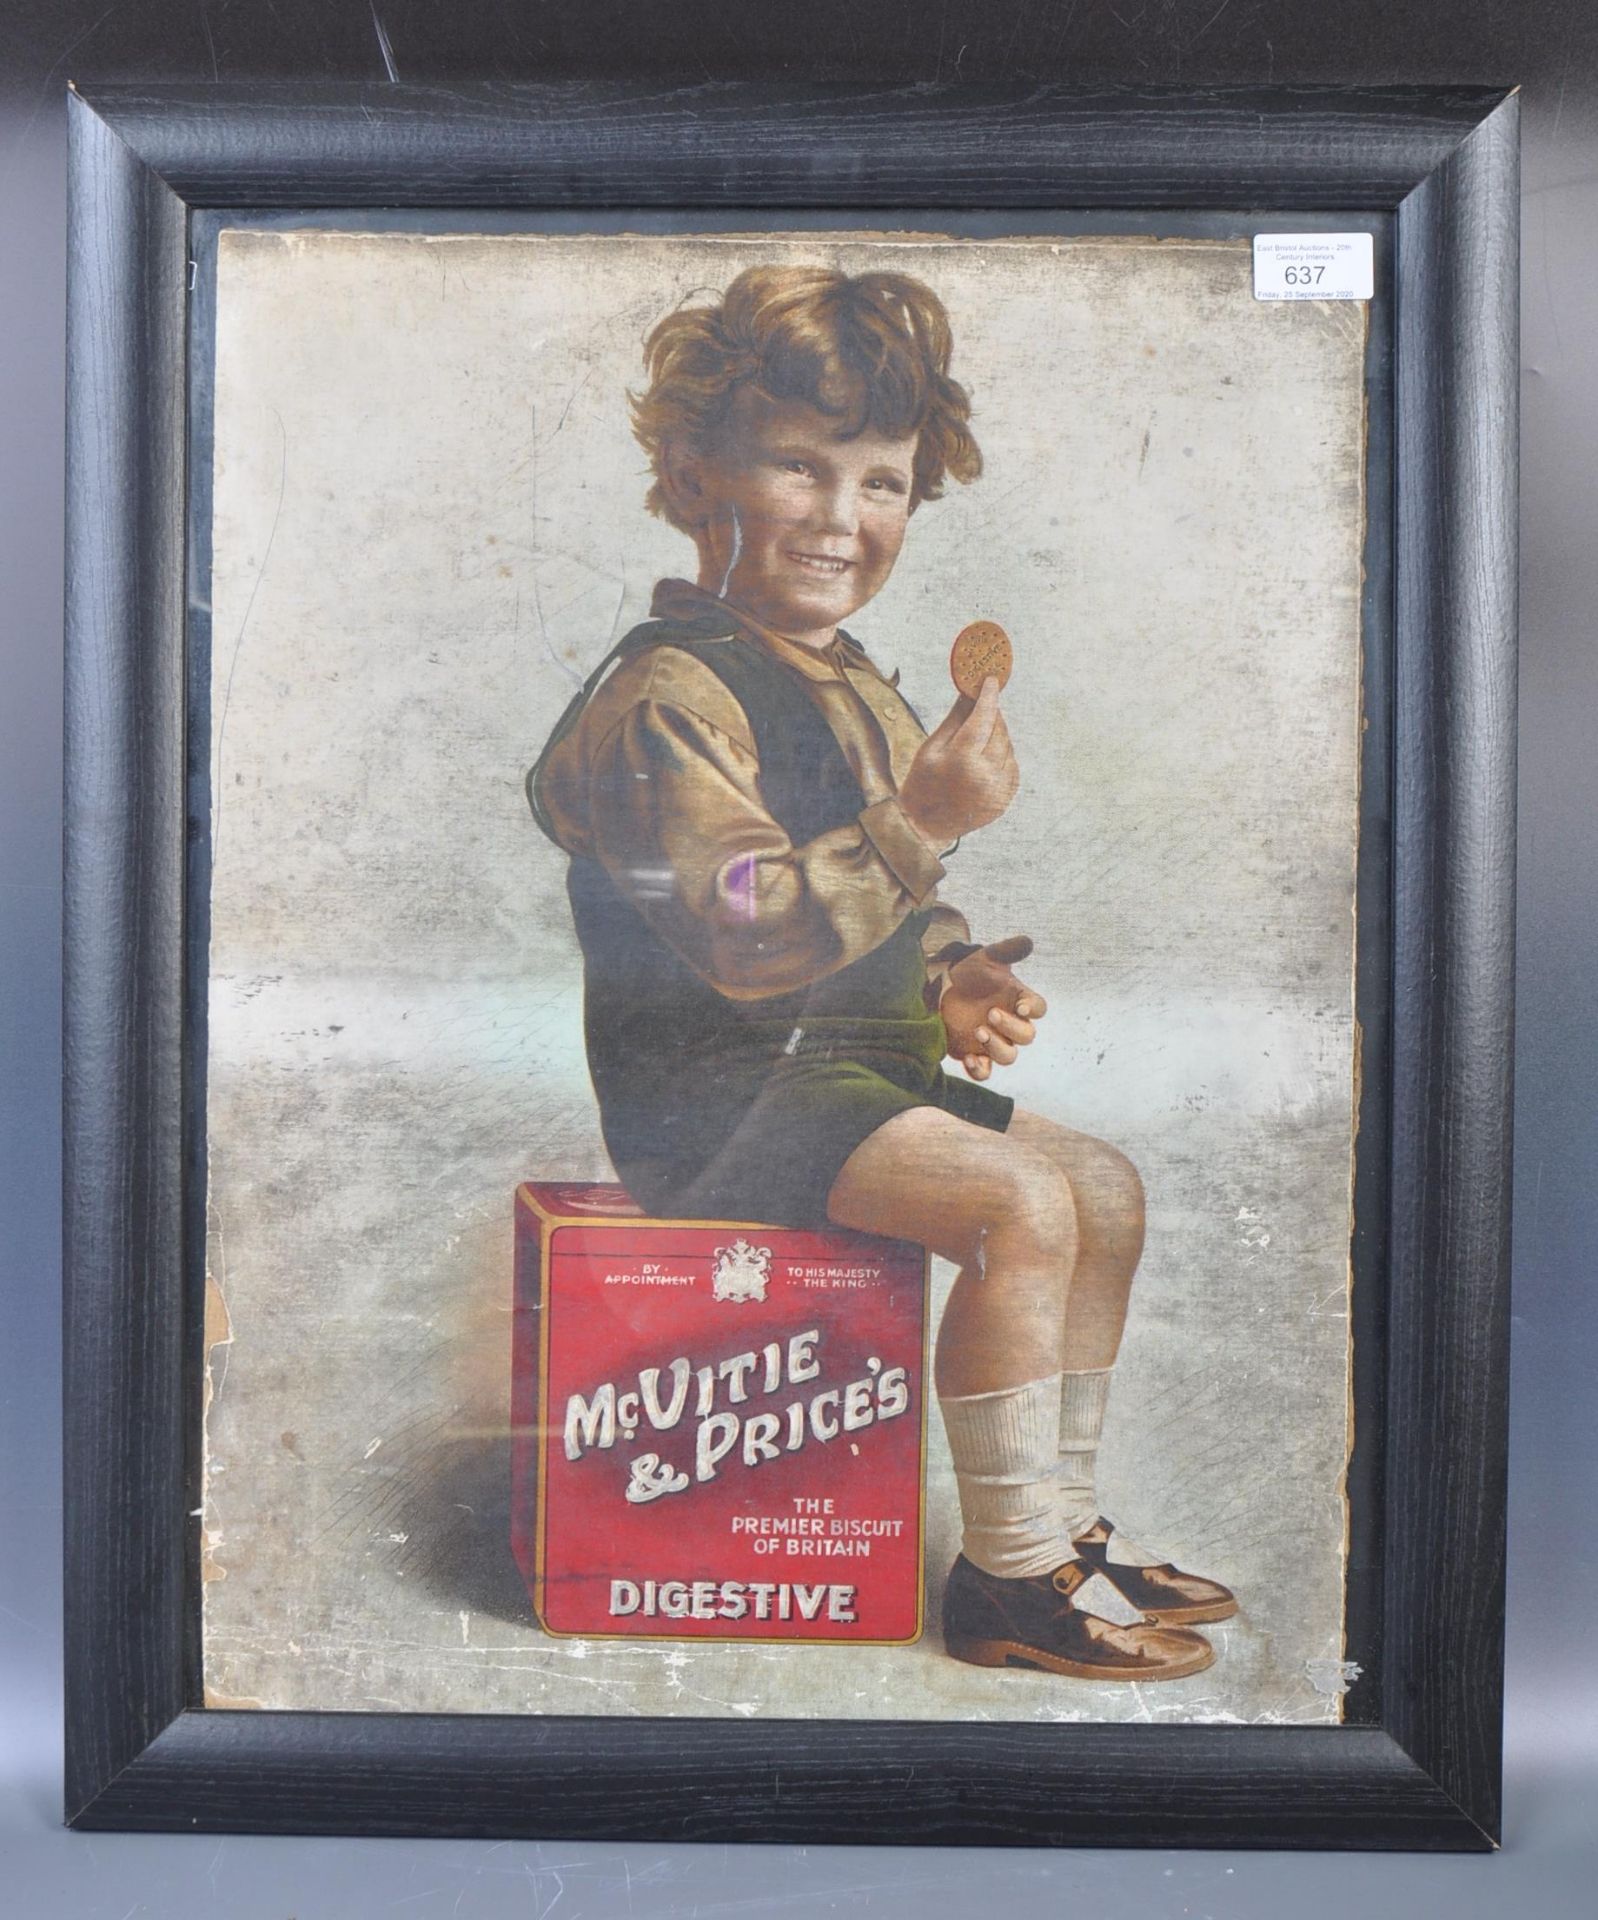 MCVITIE & PRICE'S POINT OF SALE ADVERTISING SHOWCARD